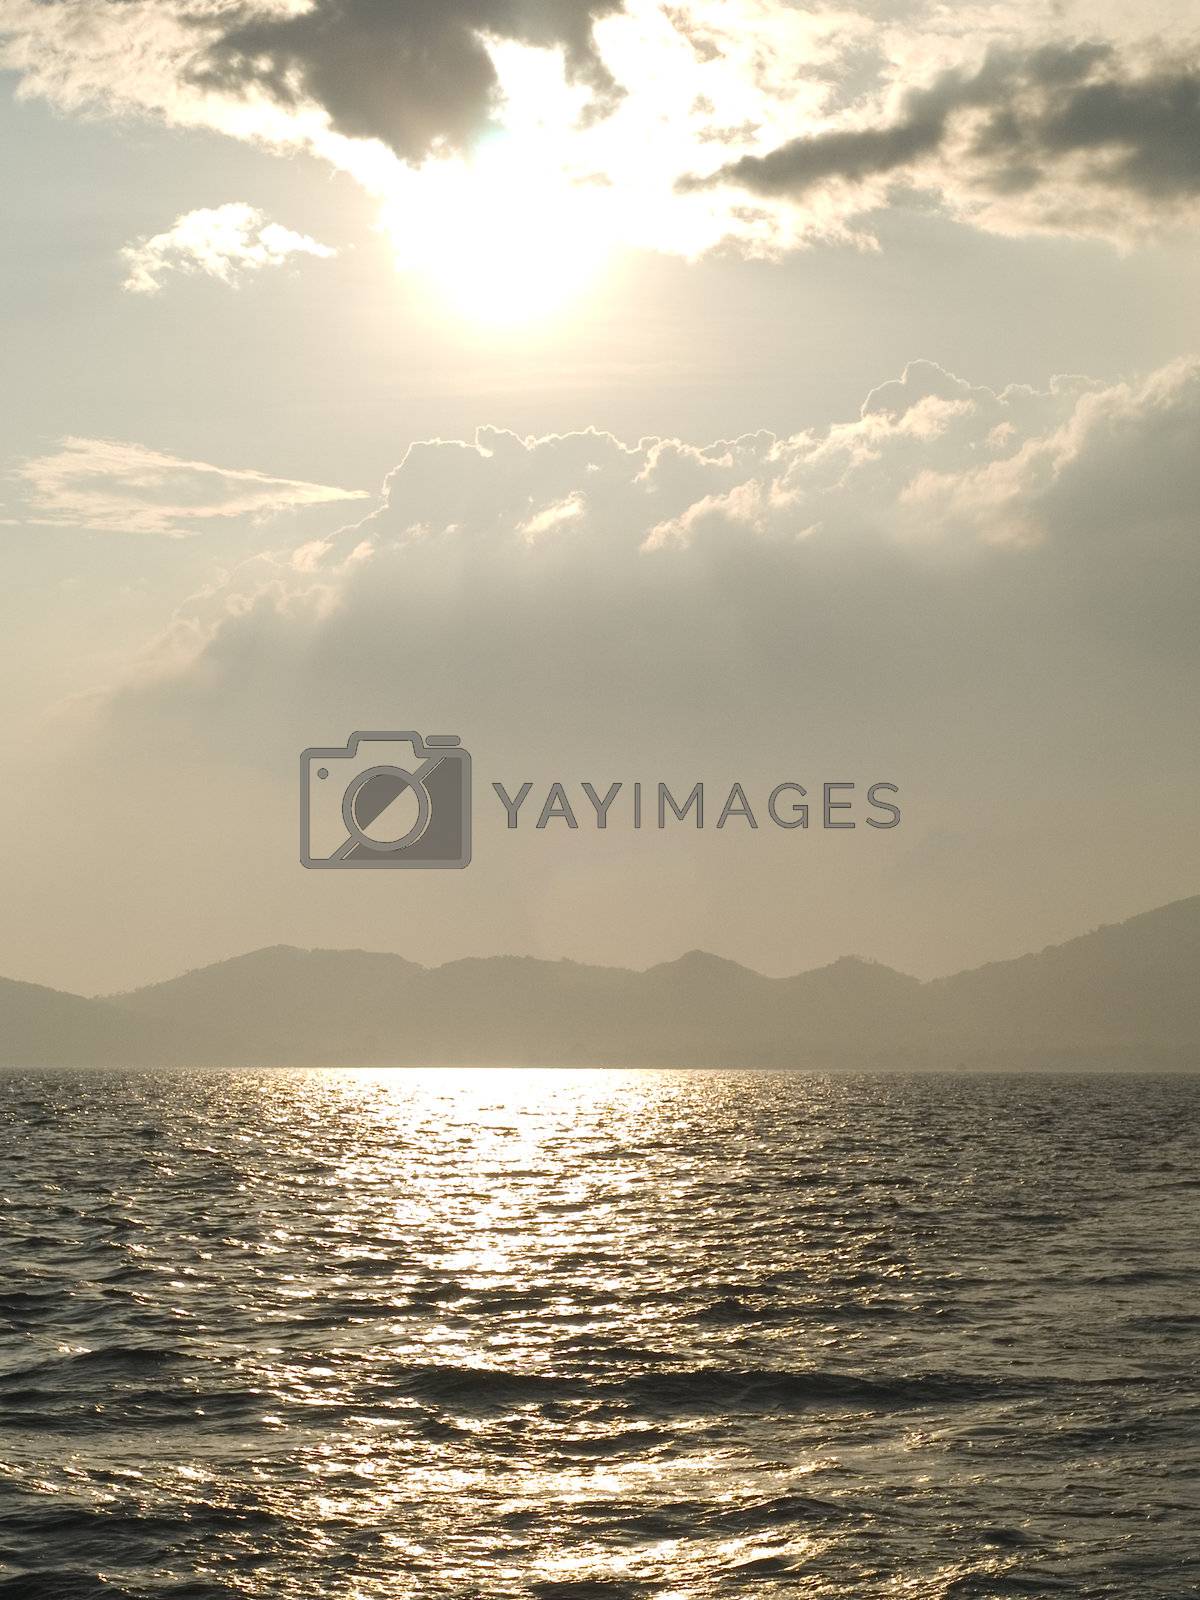 Royalty free image of Sun, sea and clouds by epixx